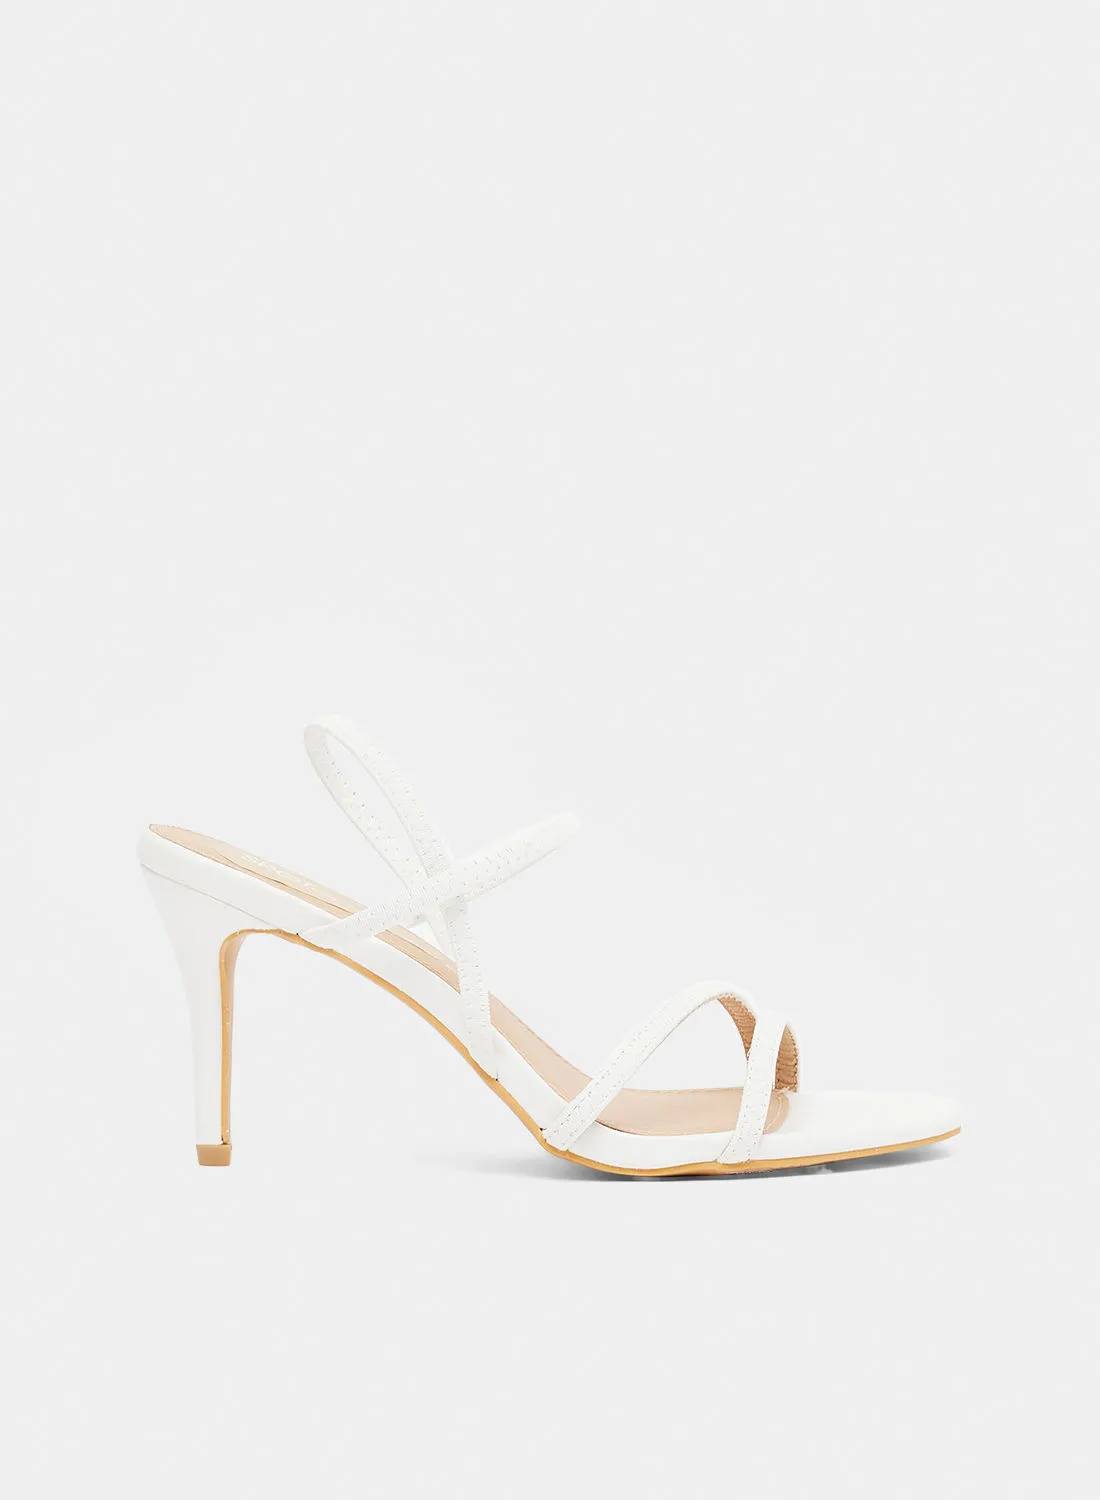 Spot-On Strappy High-Heel Sandals